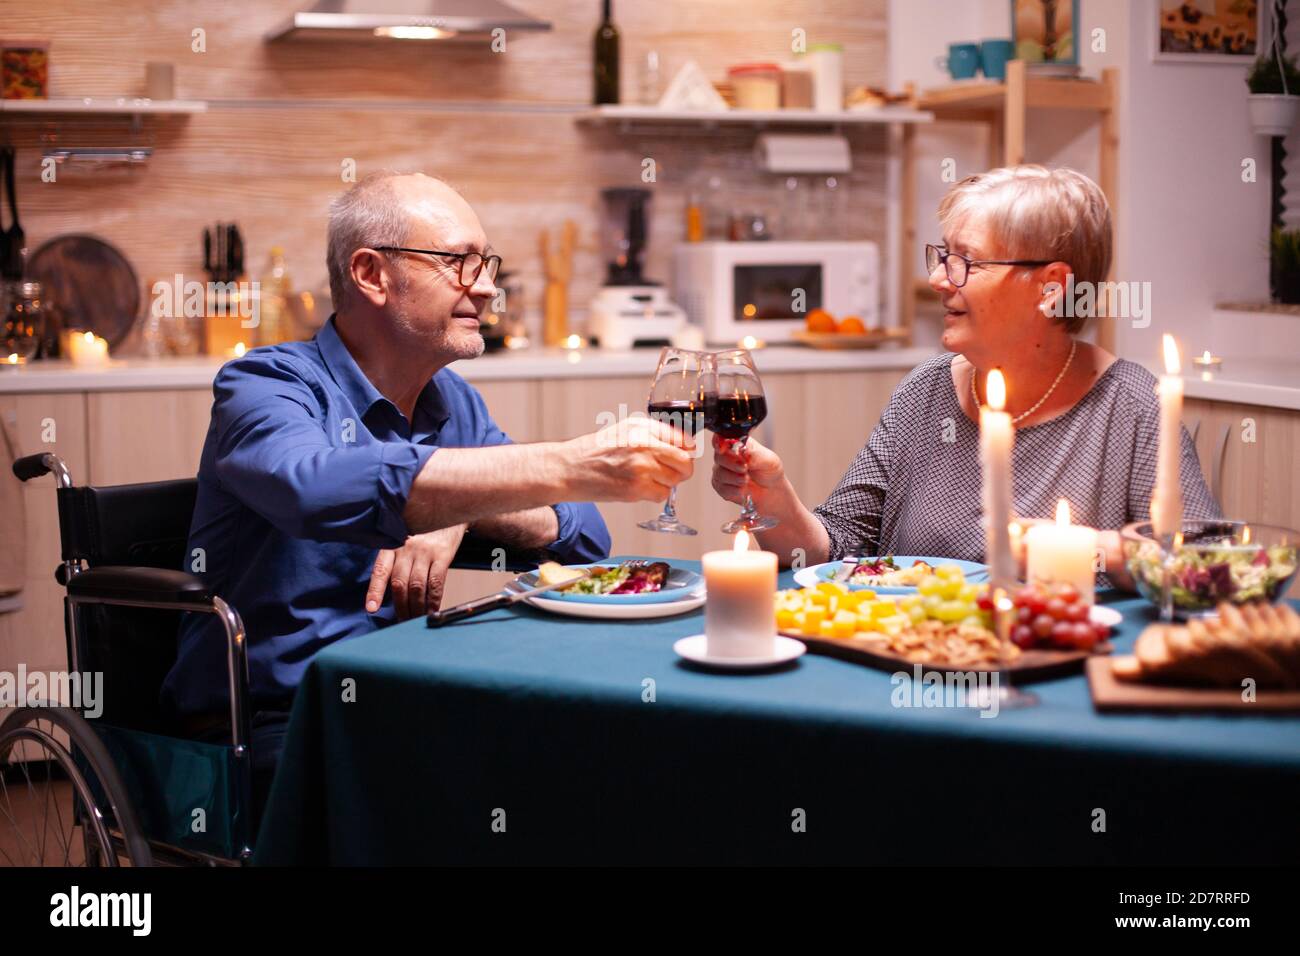 Handicapped man having dinner with man in kitchen toasting. Wheelchair immobilized paralyzed handicapped man dining with wife at home, enjoying the meal Stock Photo